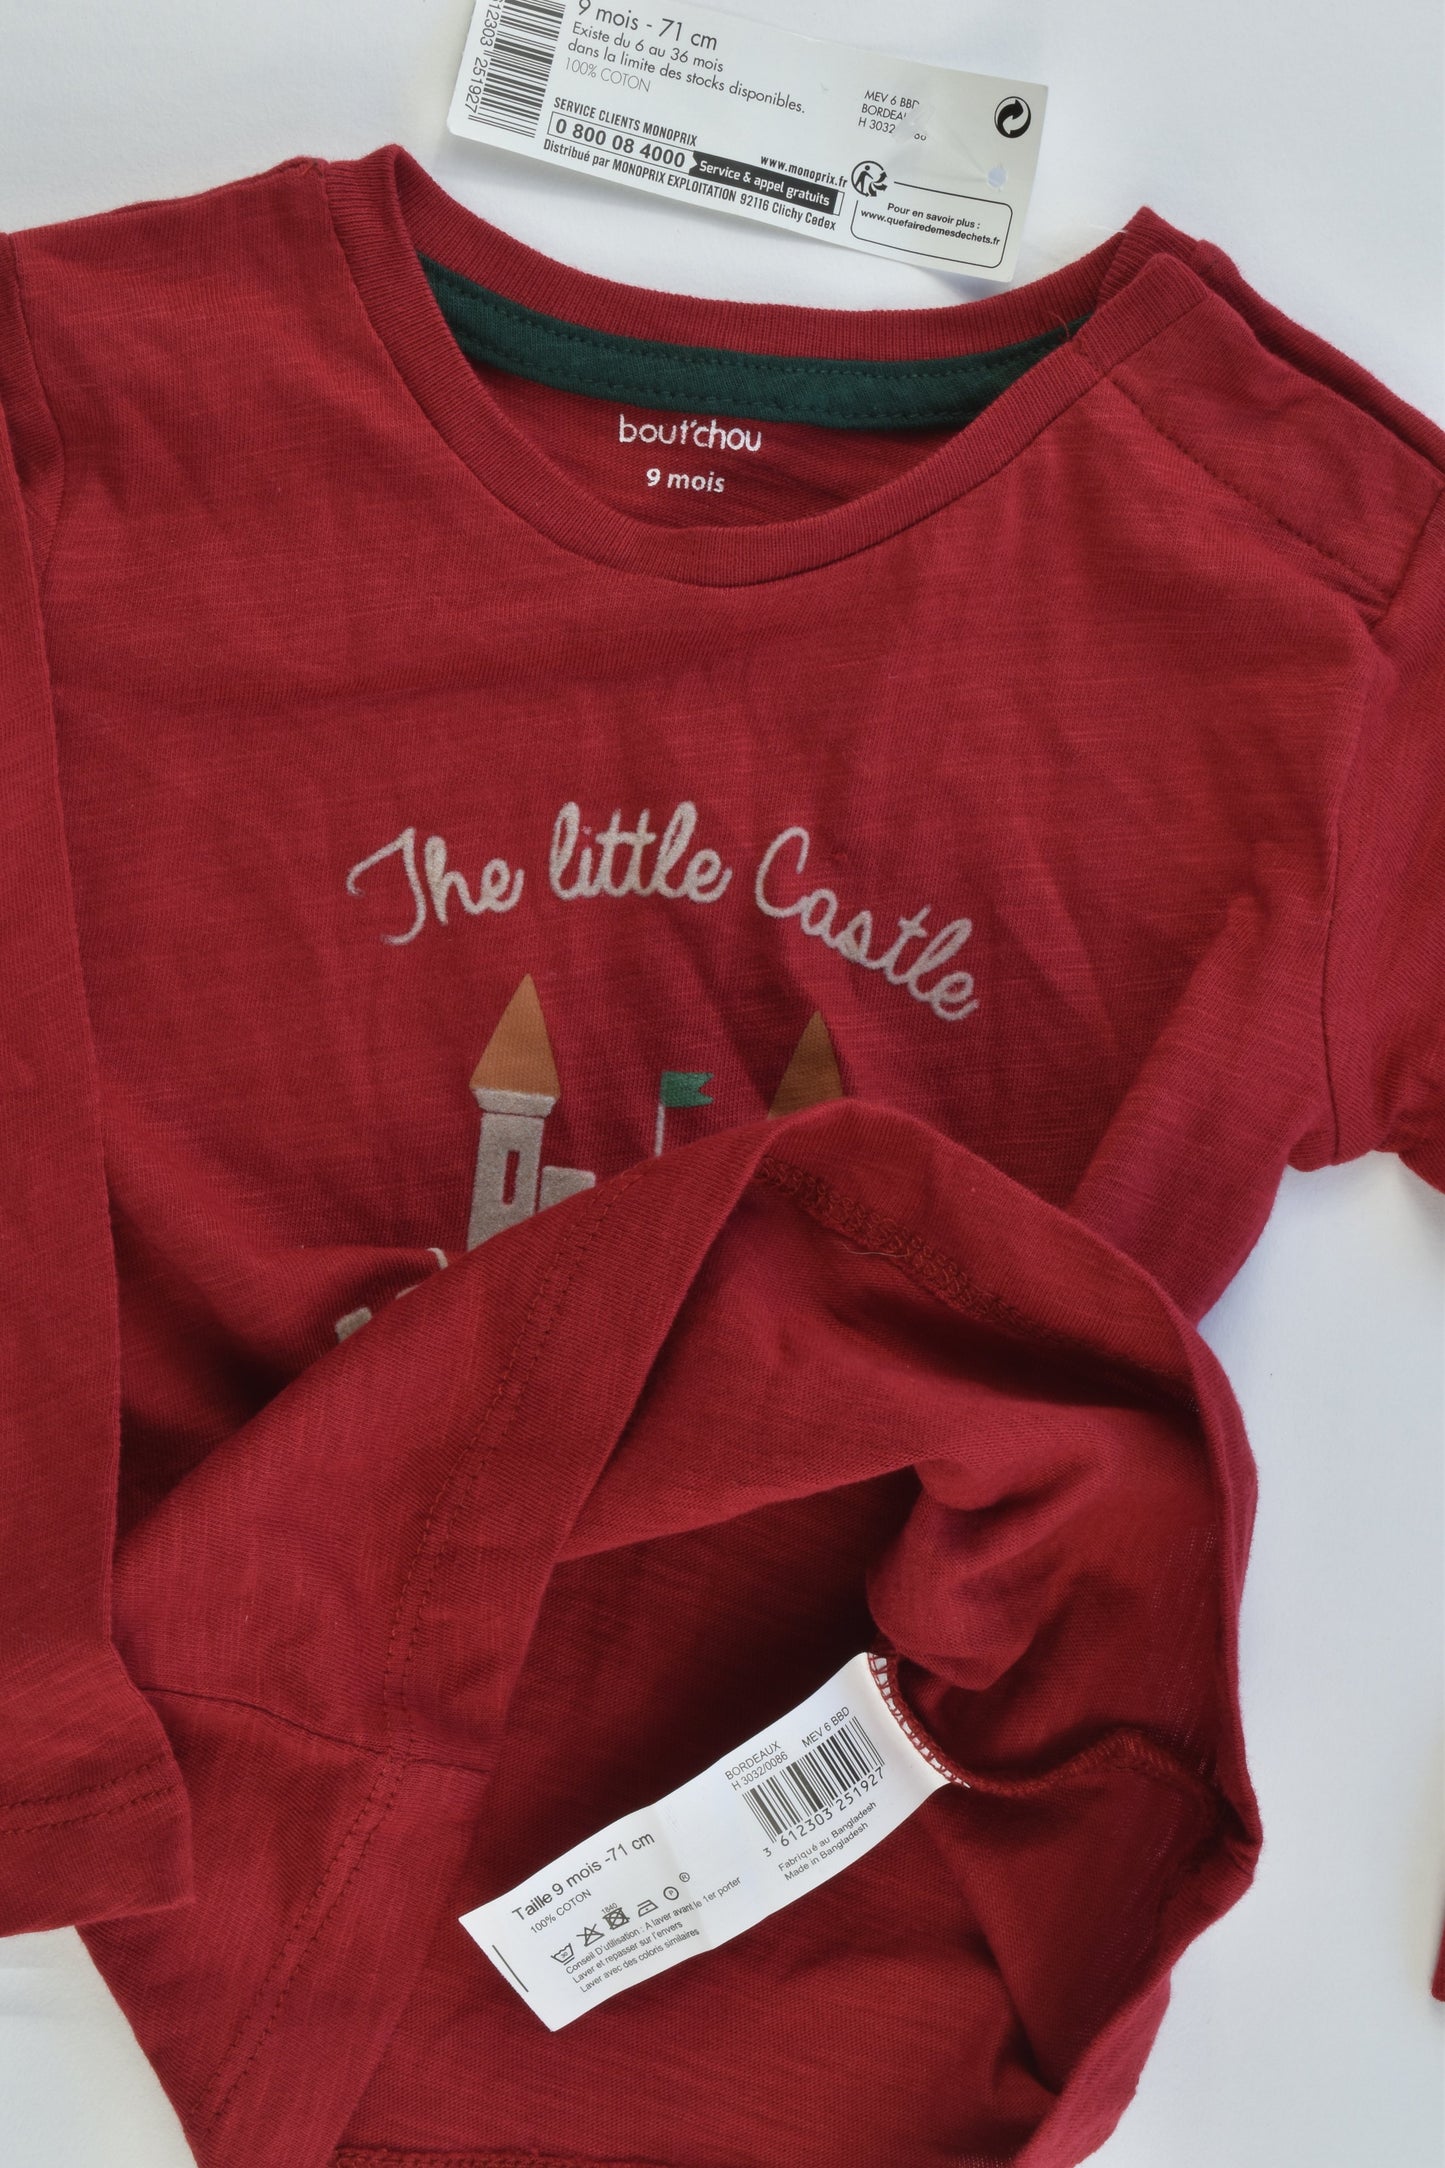 NEW Bout'Chou Size 0 (9 months, 71 cm) 'The Little Castle Of Royal Baby' Top